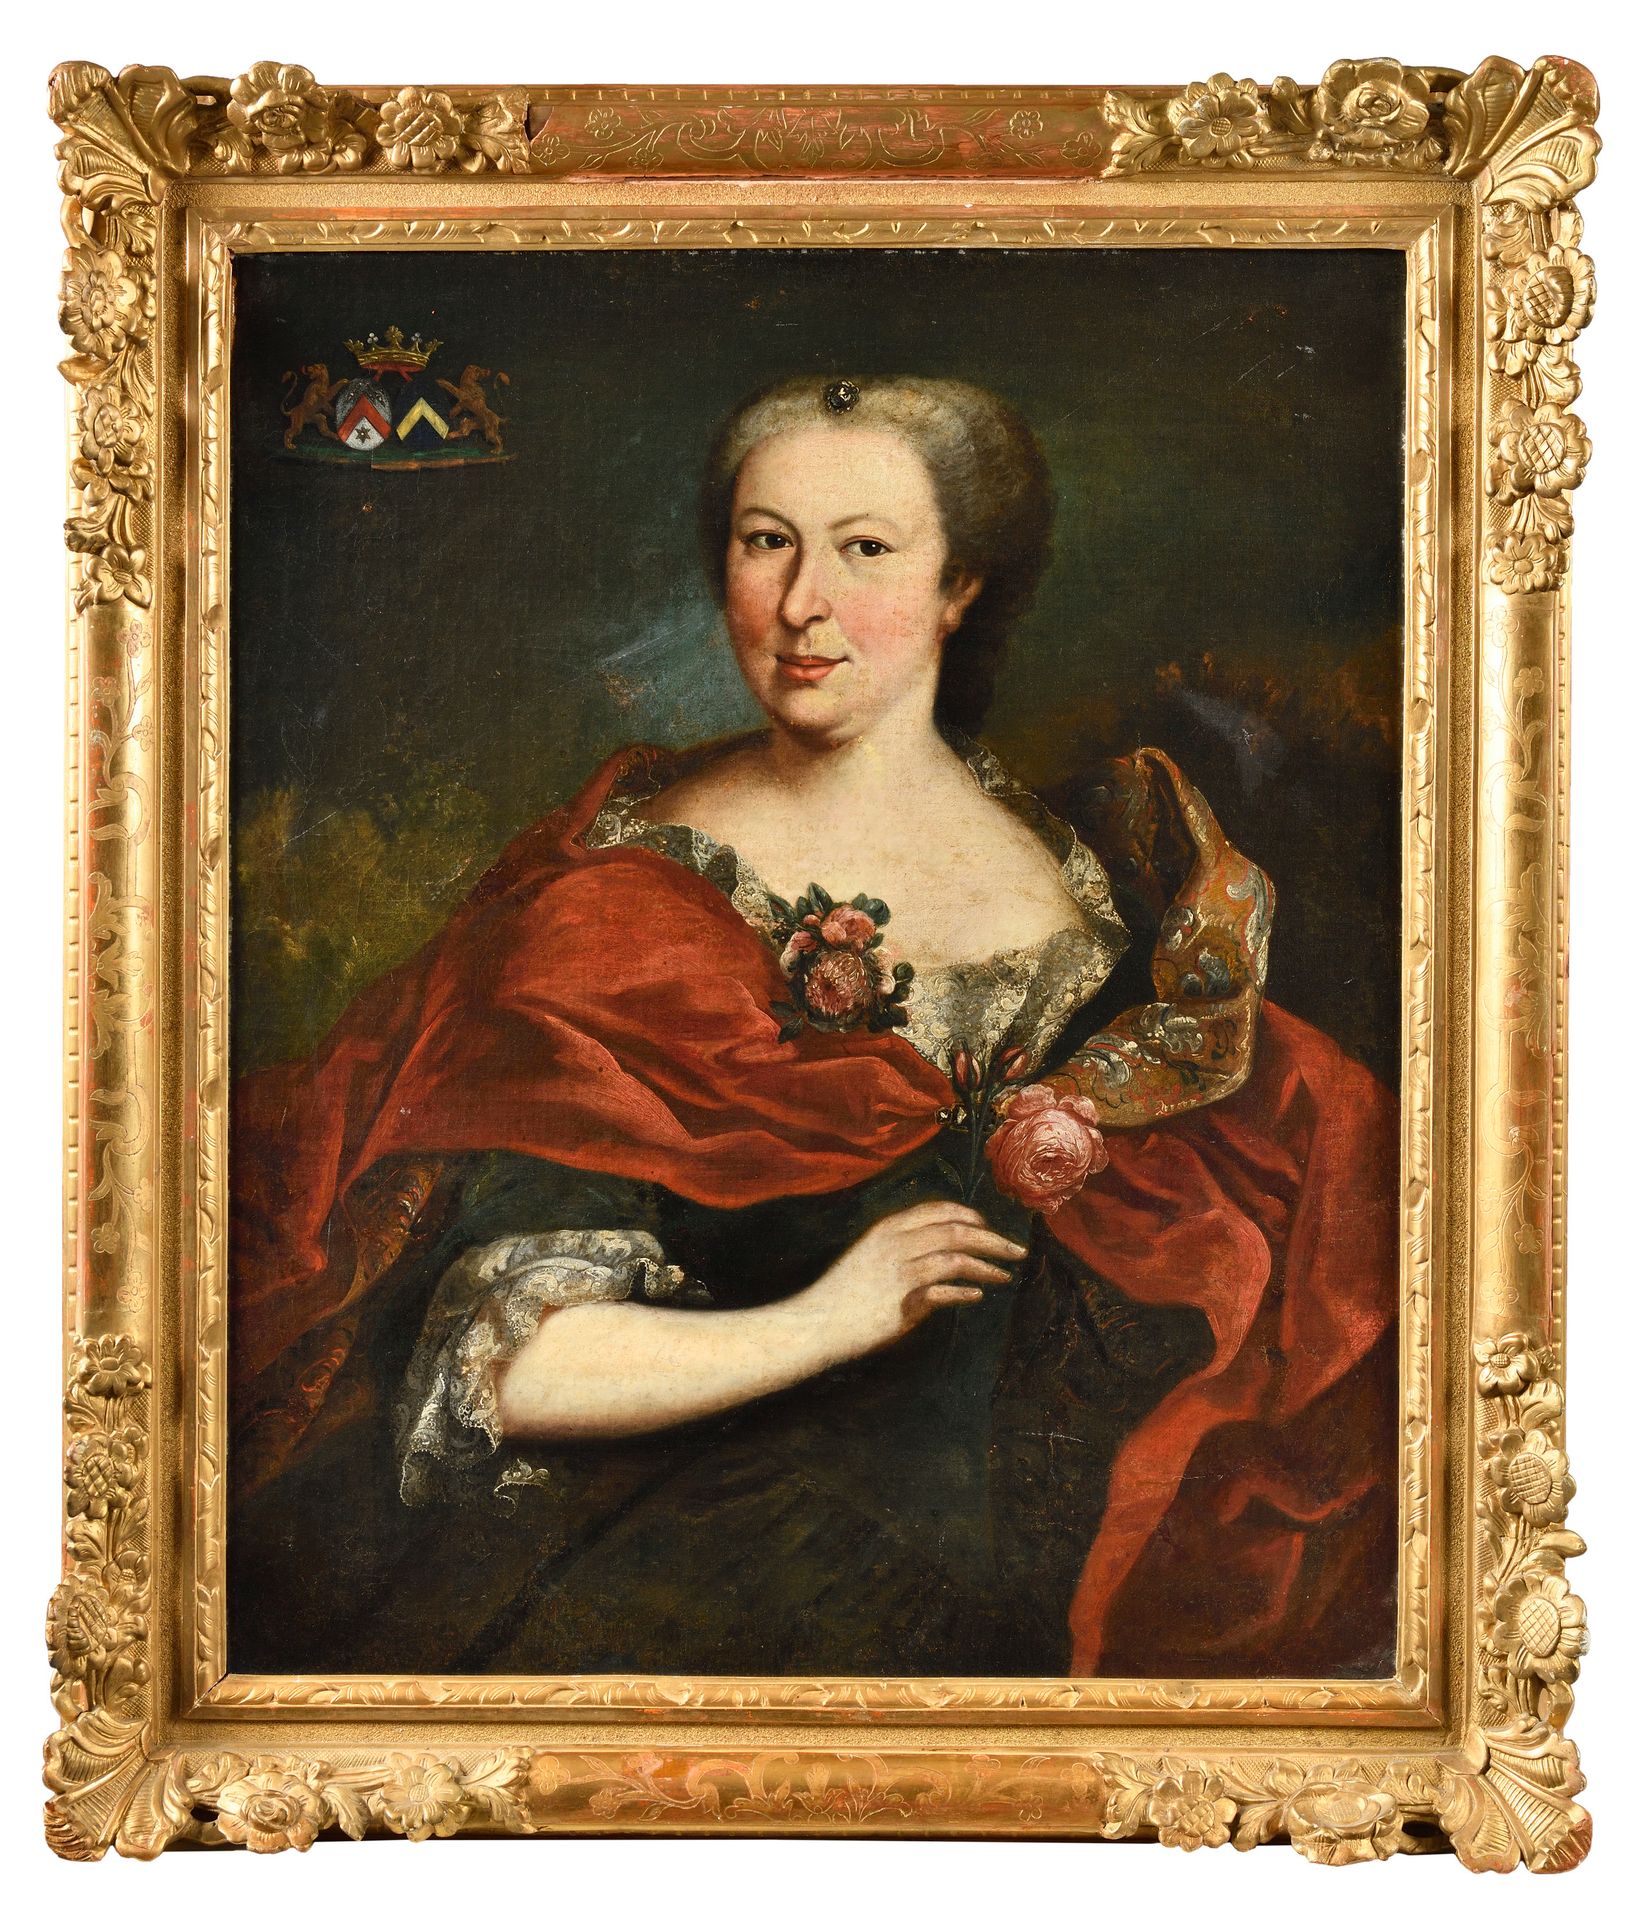 Null FRENCH SCHOOL circa 1740
Portrait of a lady holding a rose. 
Coat of arms u&hellip;